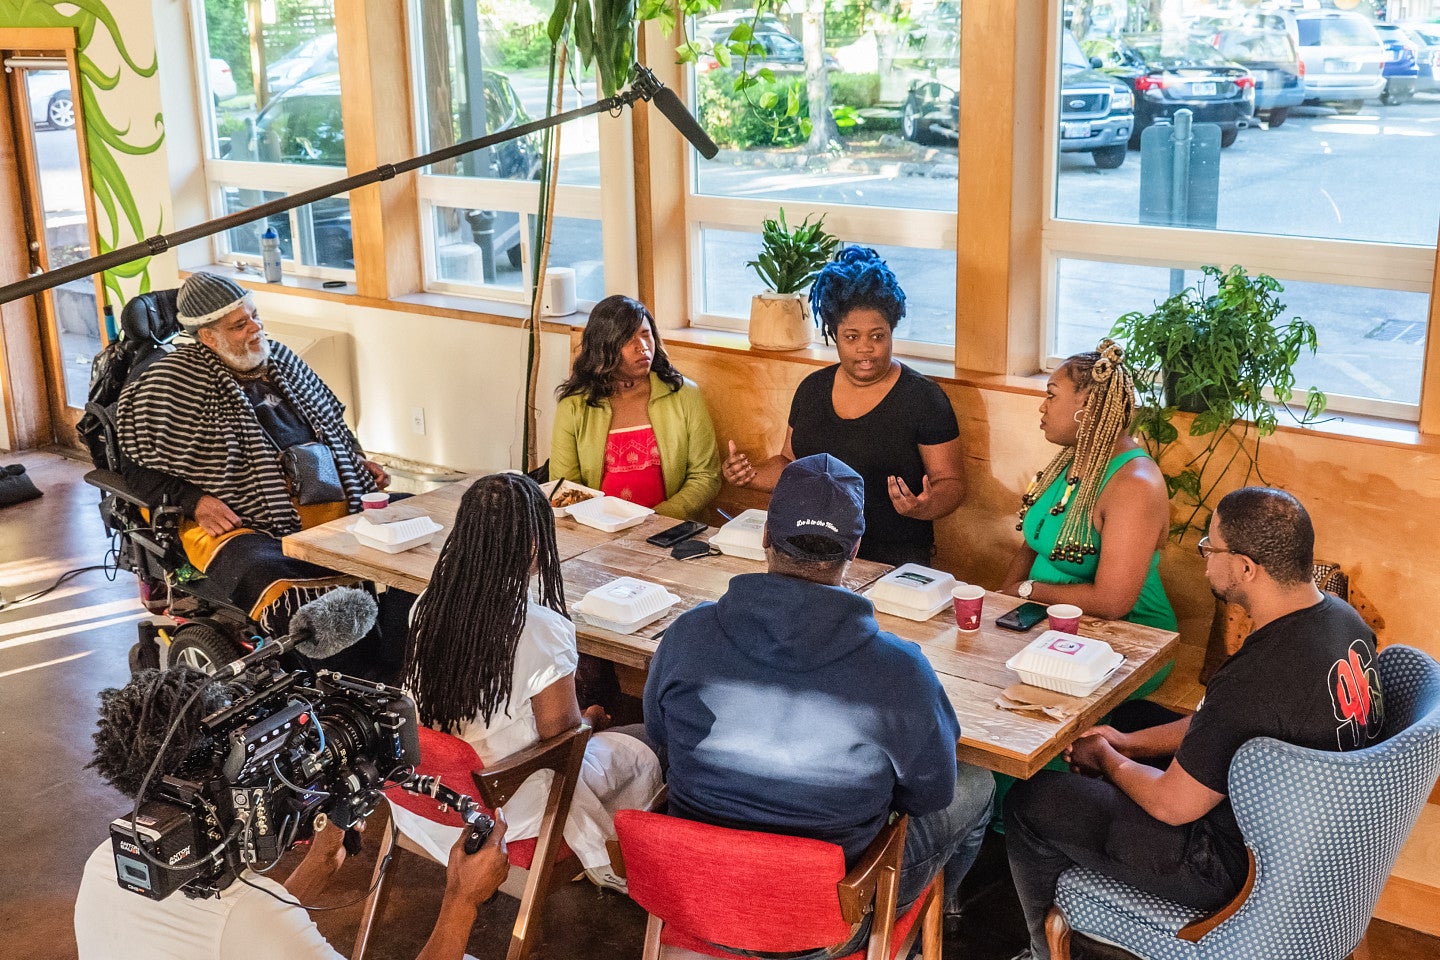 A group of Black Portlanders have a discussion around a table while they are filmed and recorded